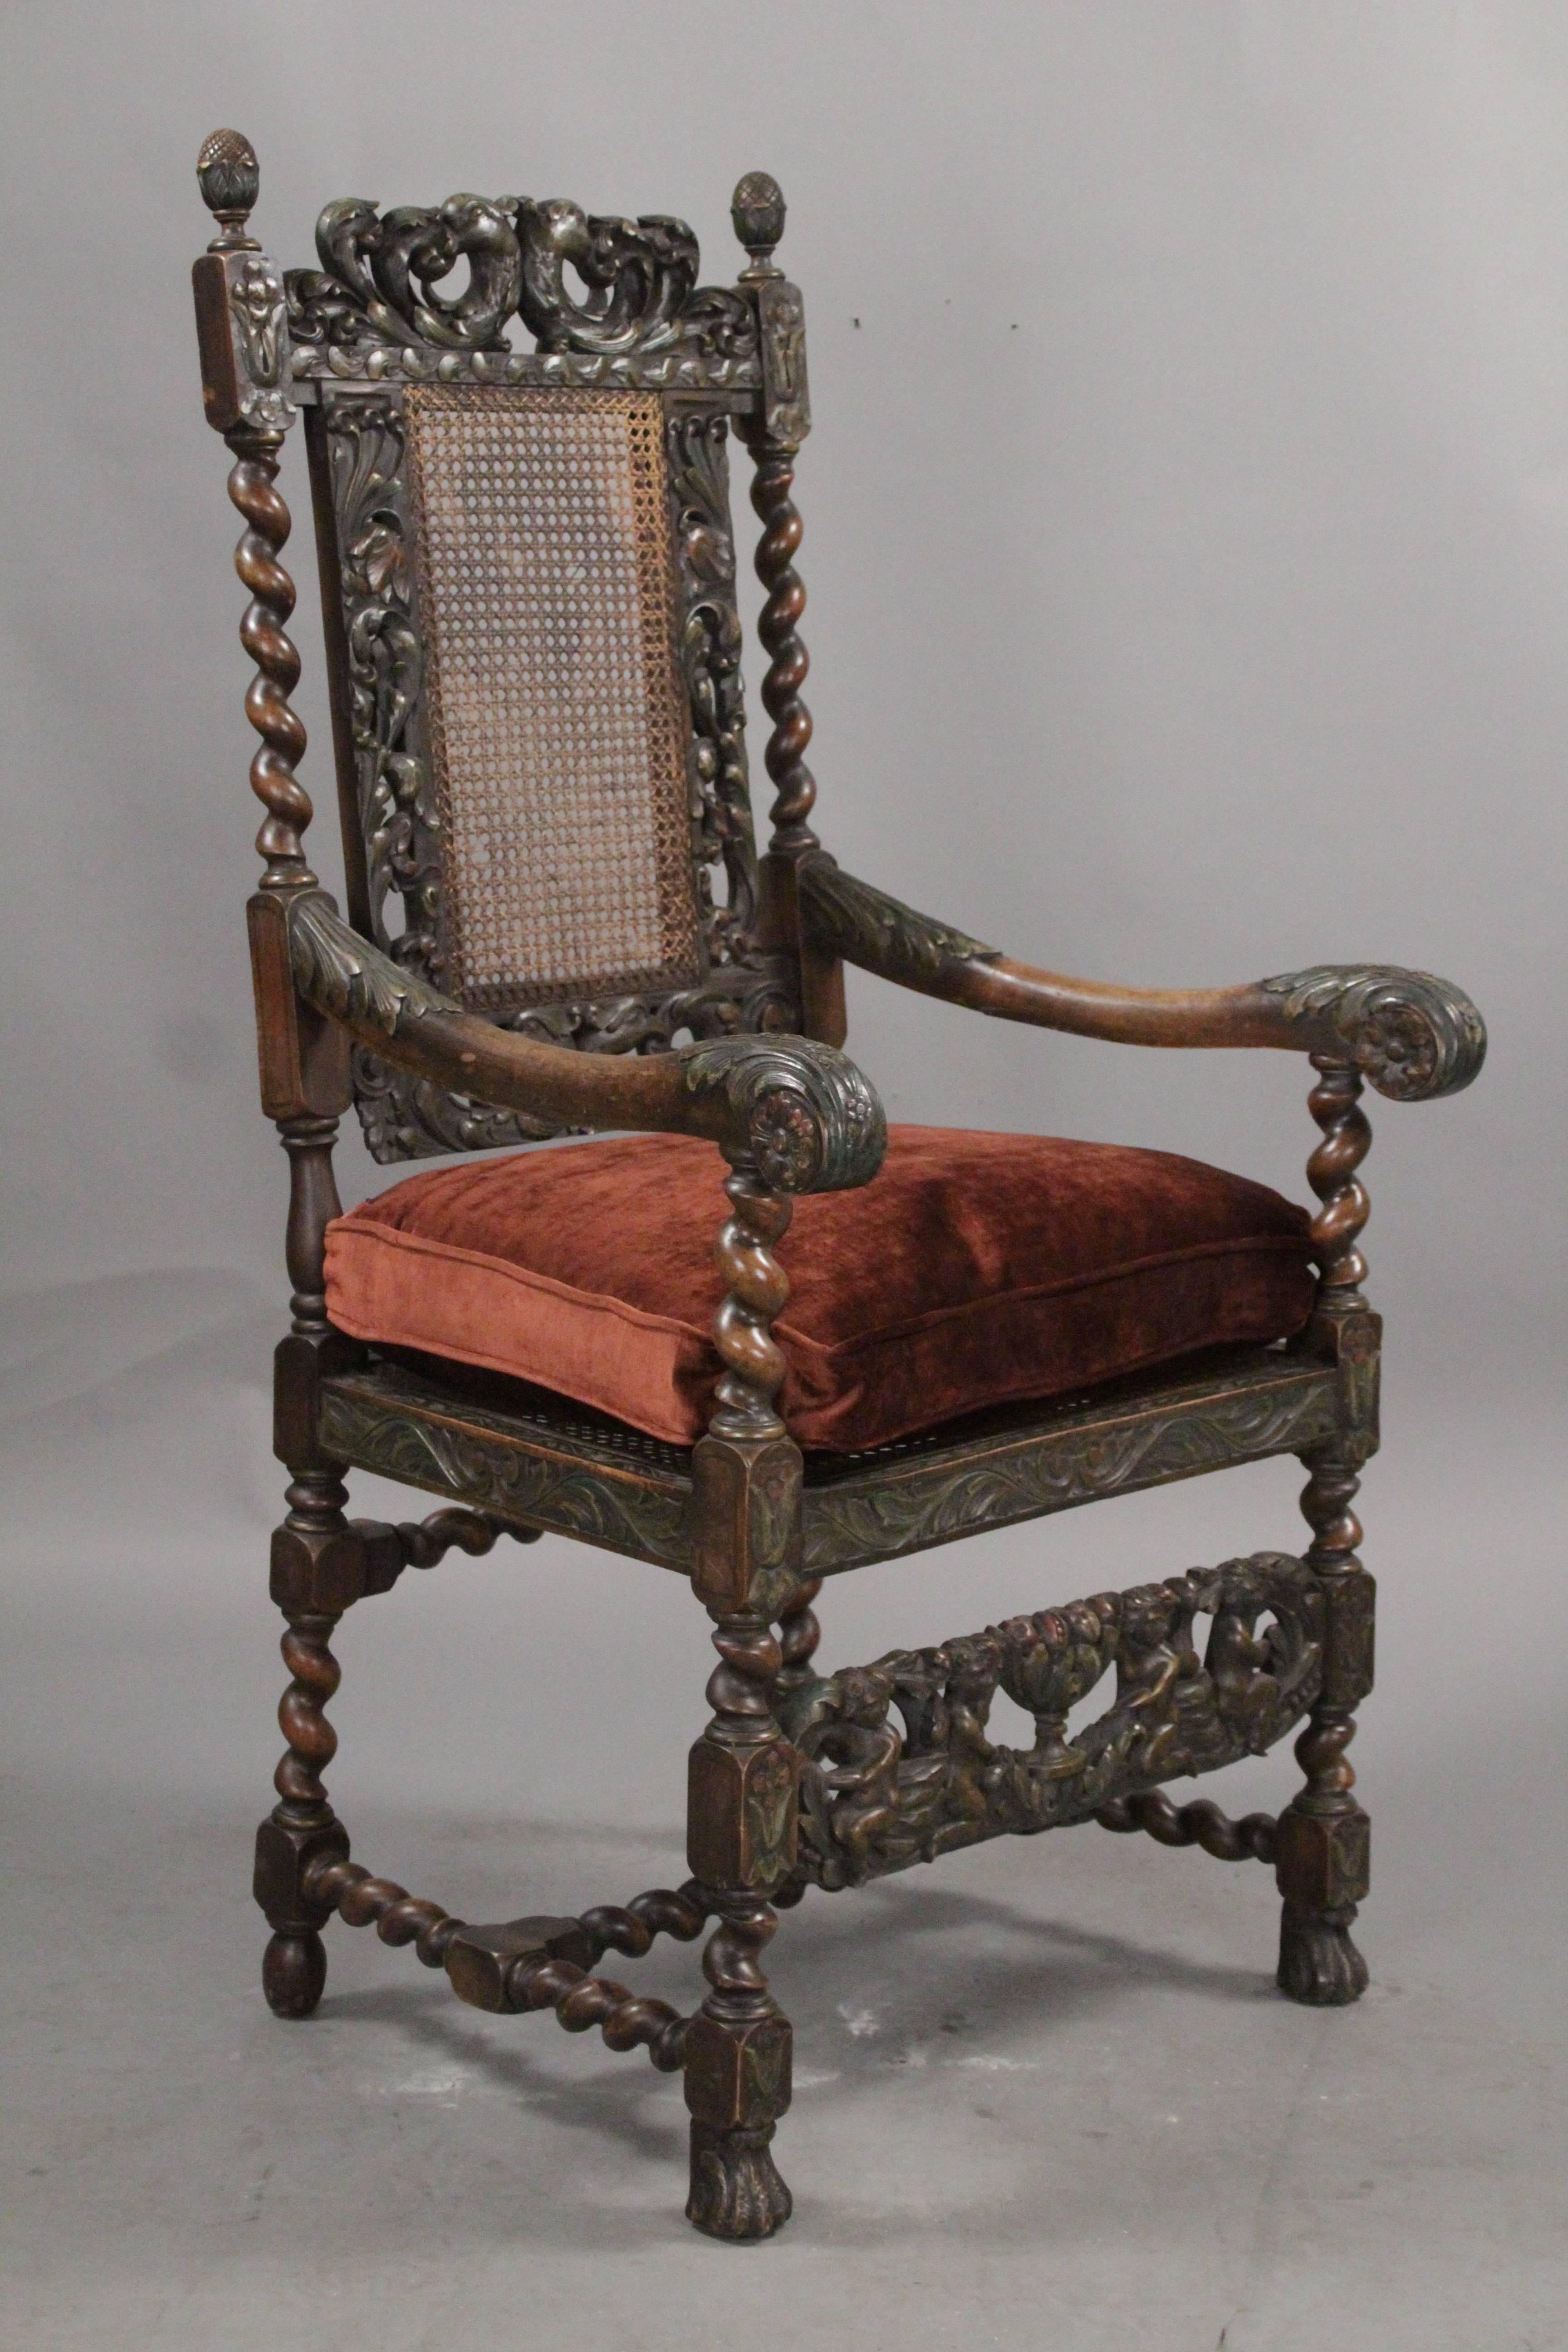 Spanish Colonial Early 1900s Carved Spanish Revival Chair with Velvet Upholstery